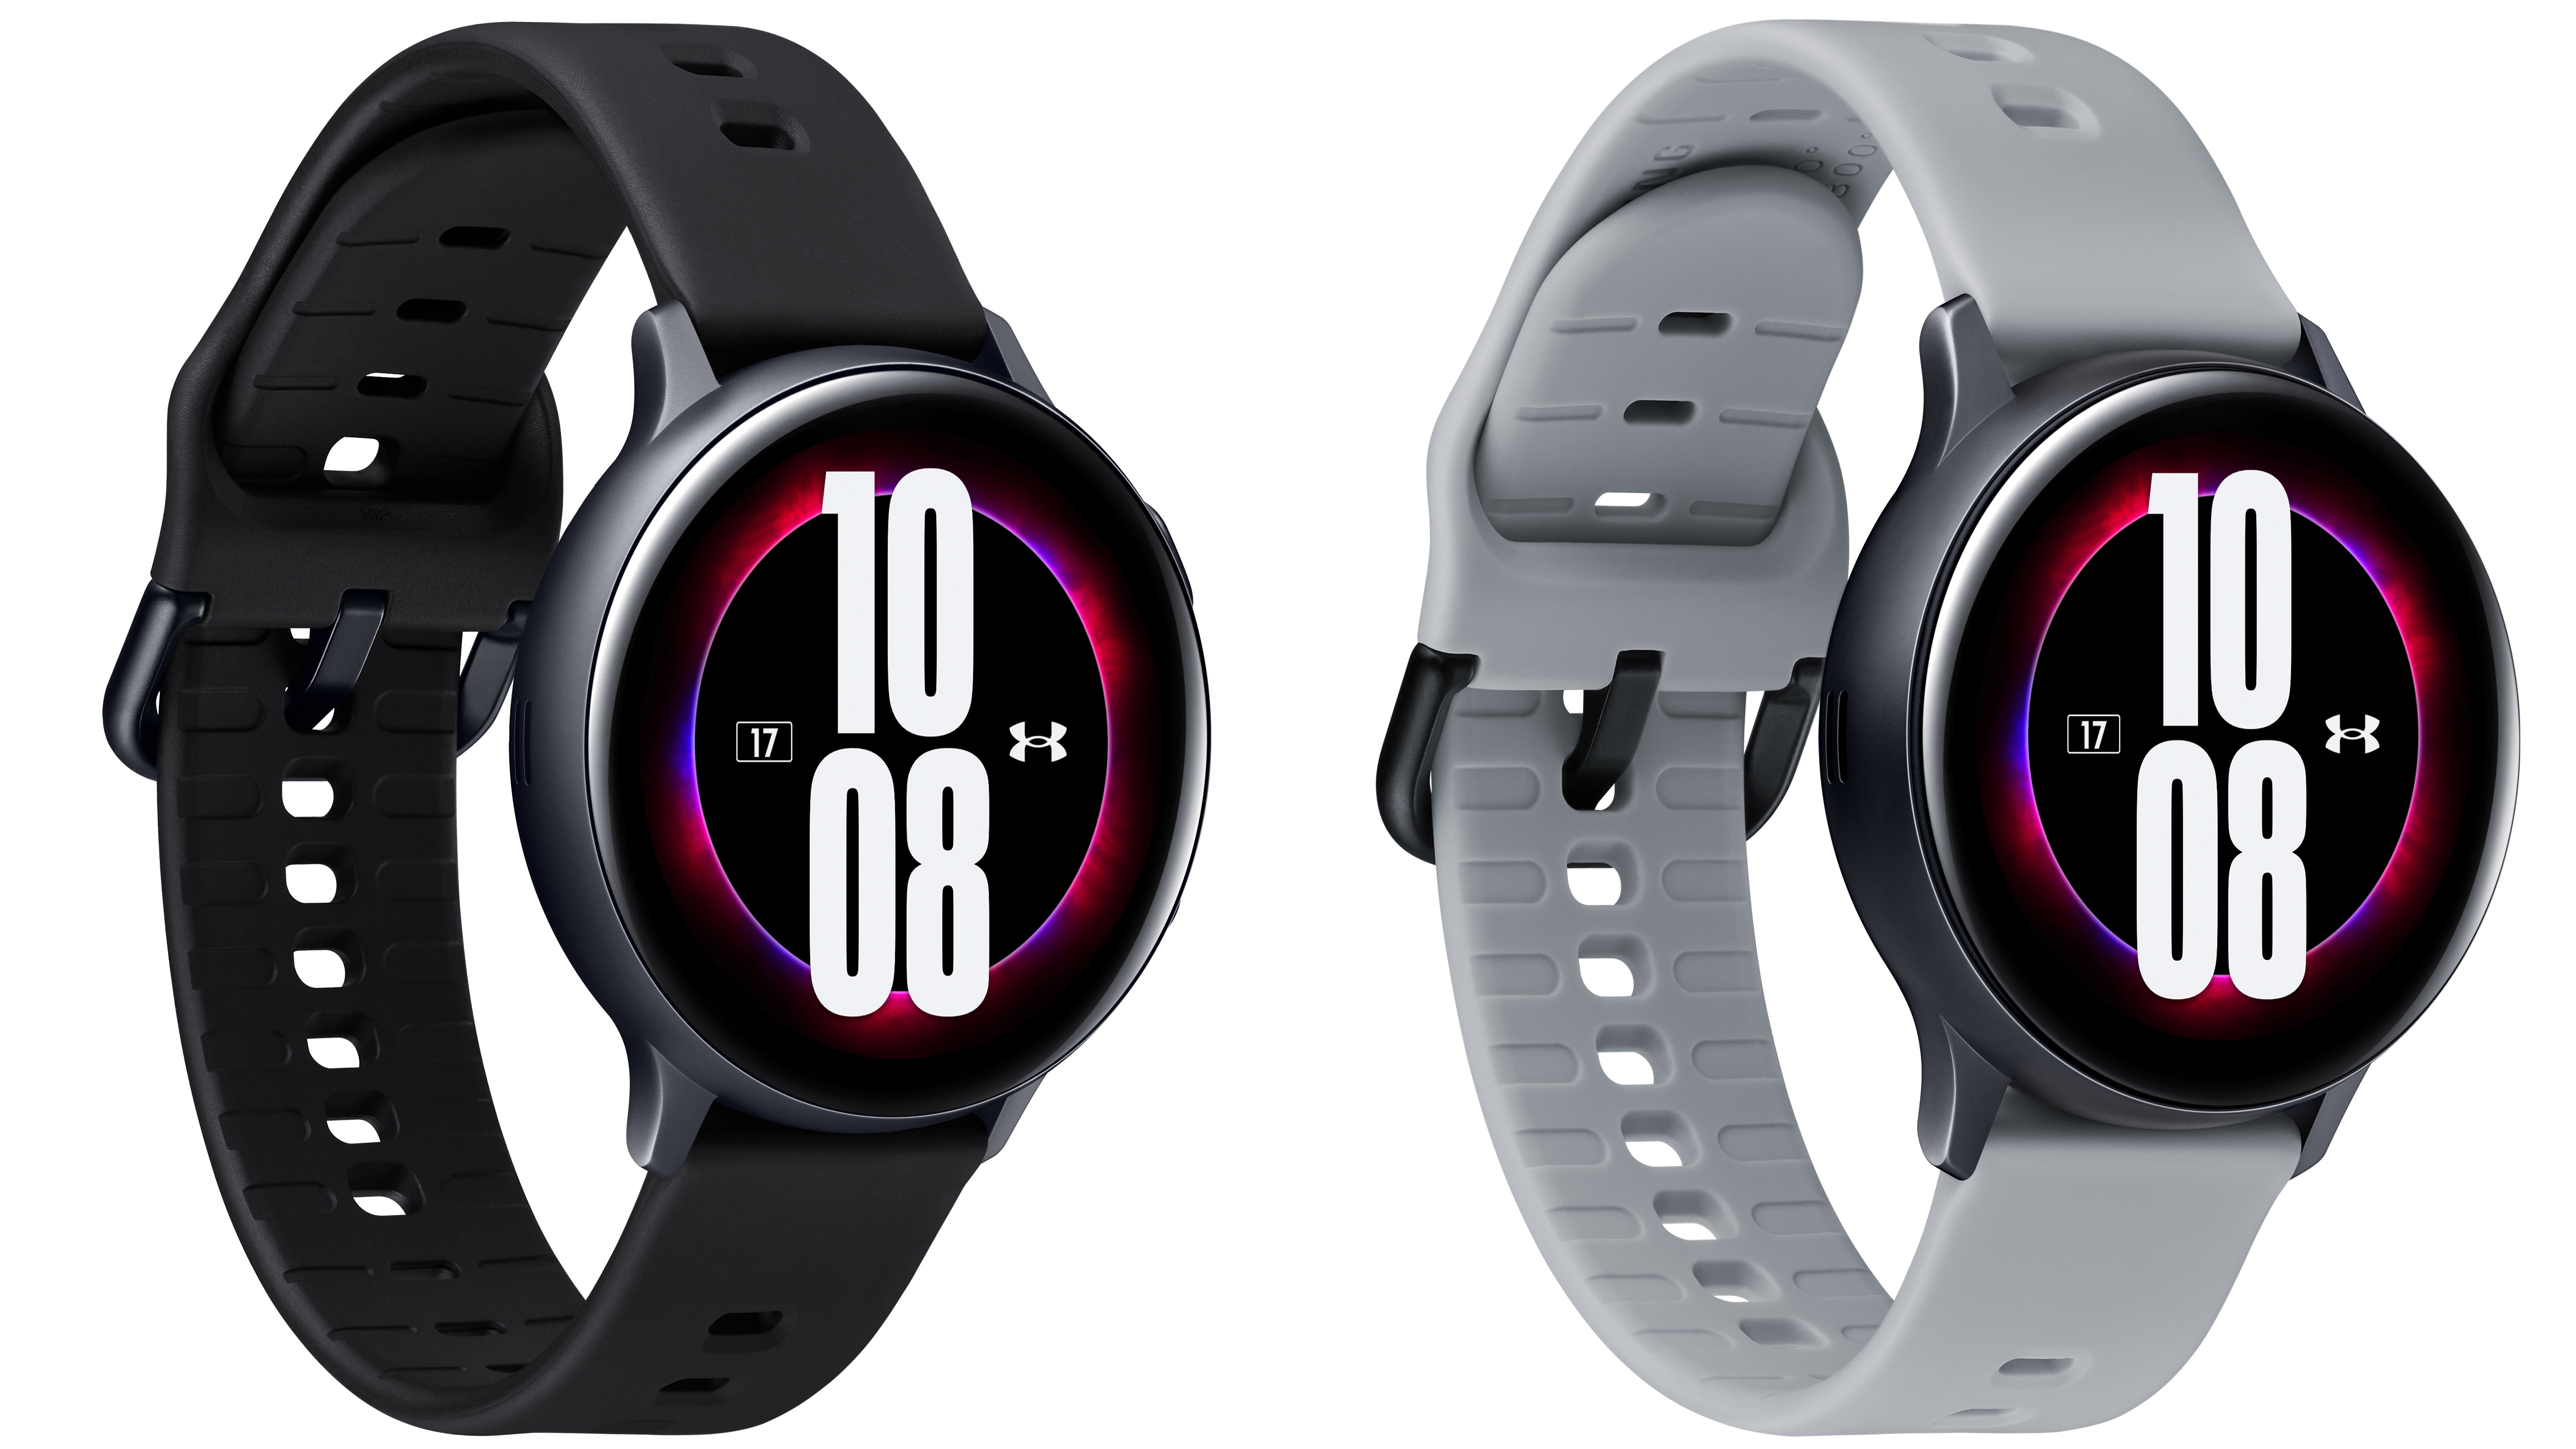 Samsung announces new Galaxy Watch Active 2 model, the Under